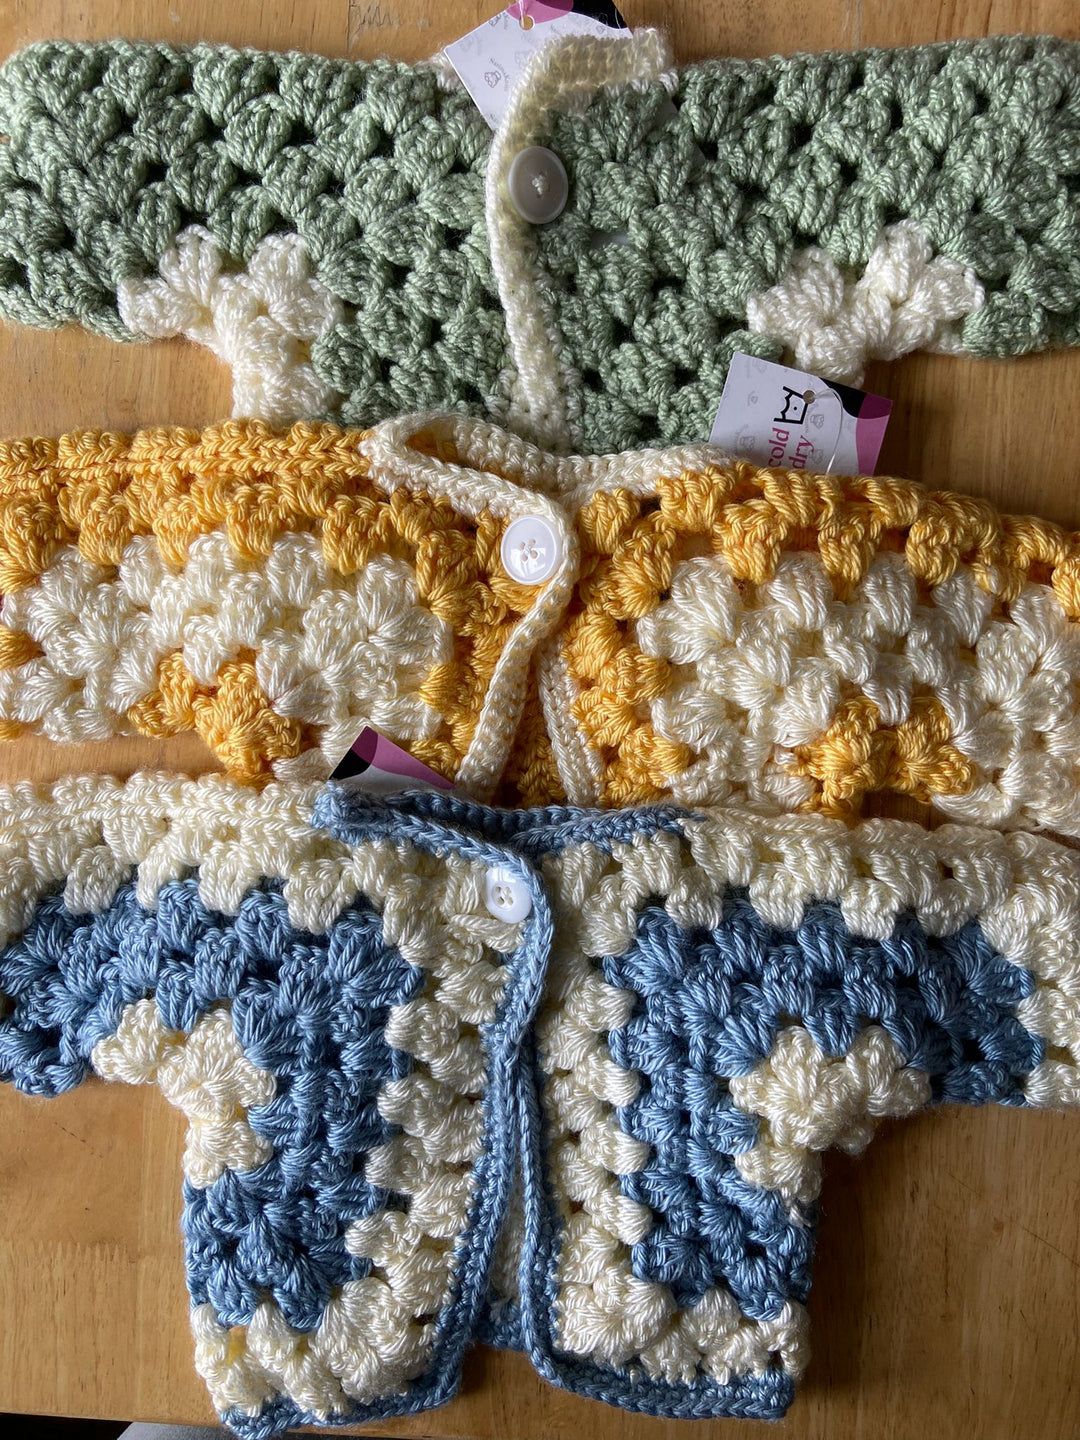 Crochet Newborn Baby Sweaters | Size 1-3 Months | Cozy and Adorable | Nazimaknits